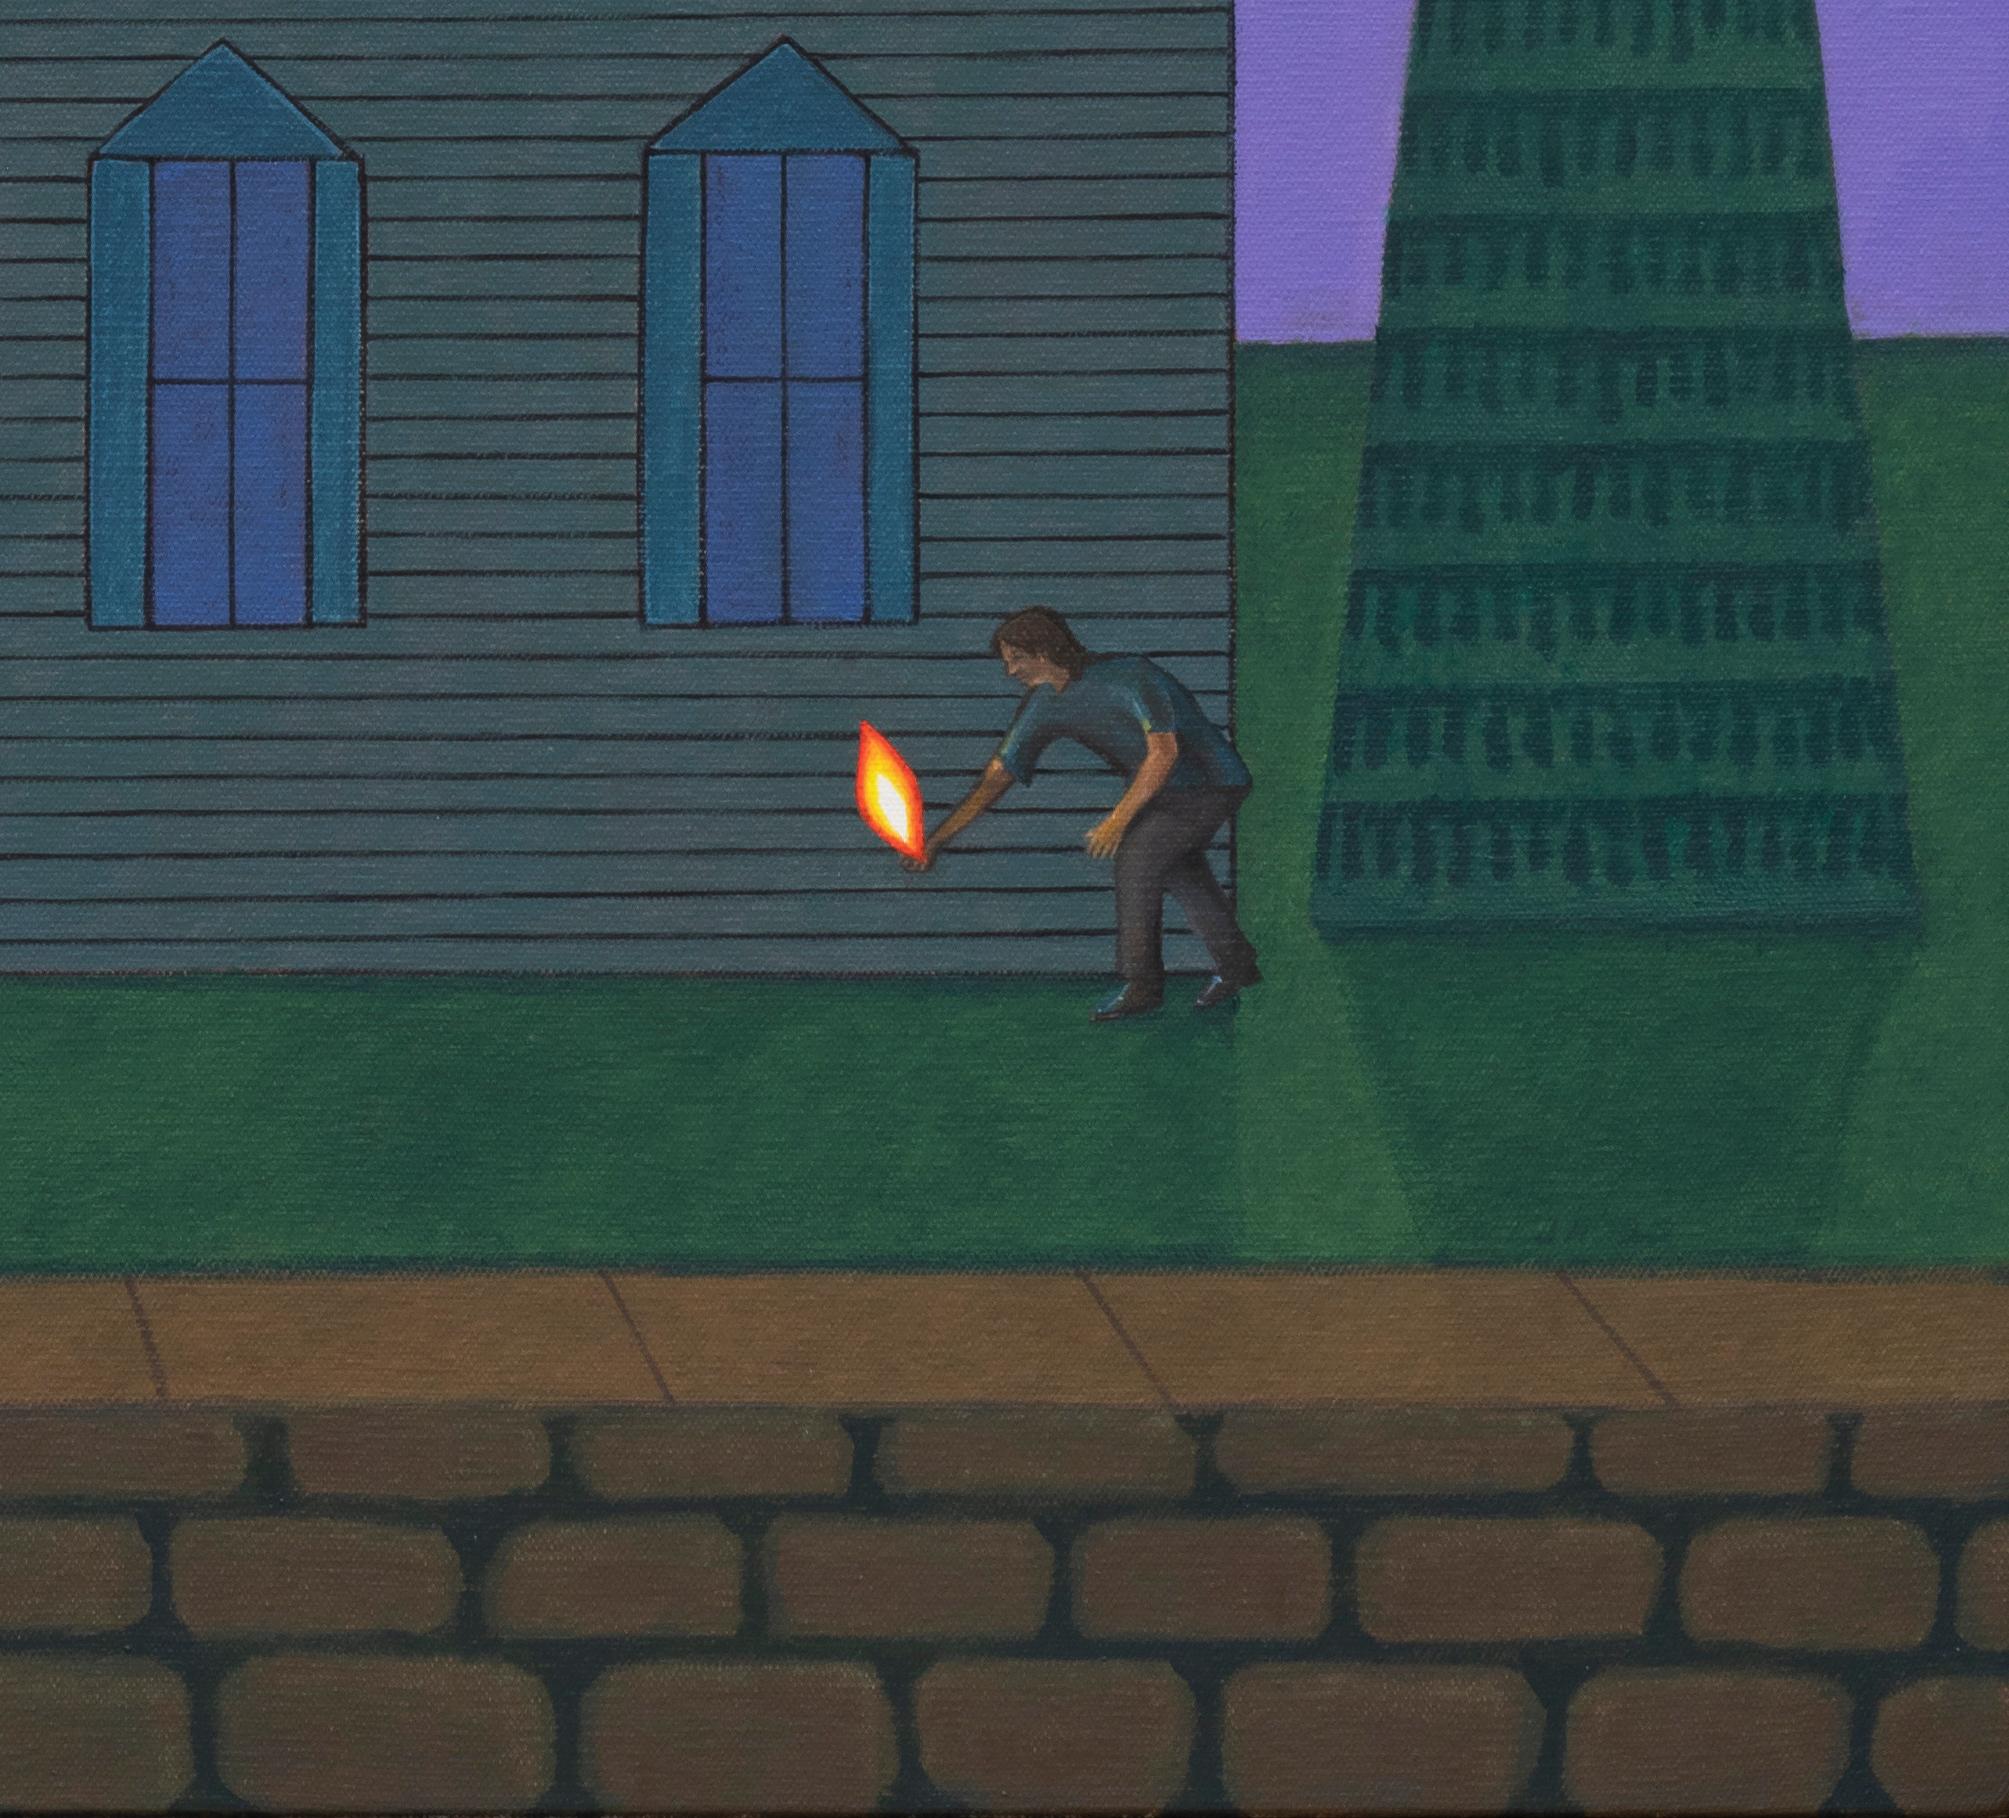 The Arsonist, Surreal Scene, Mansion Shrouded in Darkness, Lone Figure w/ Match 2